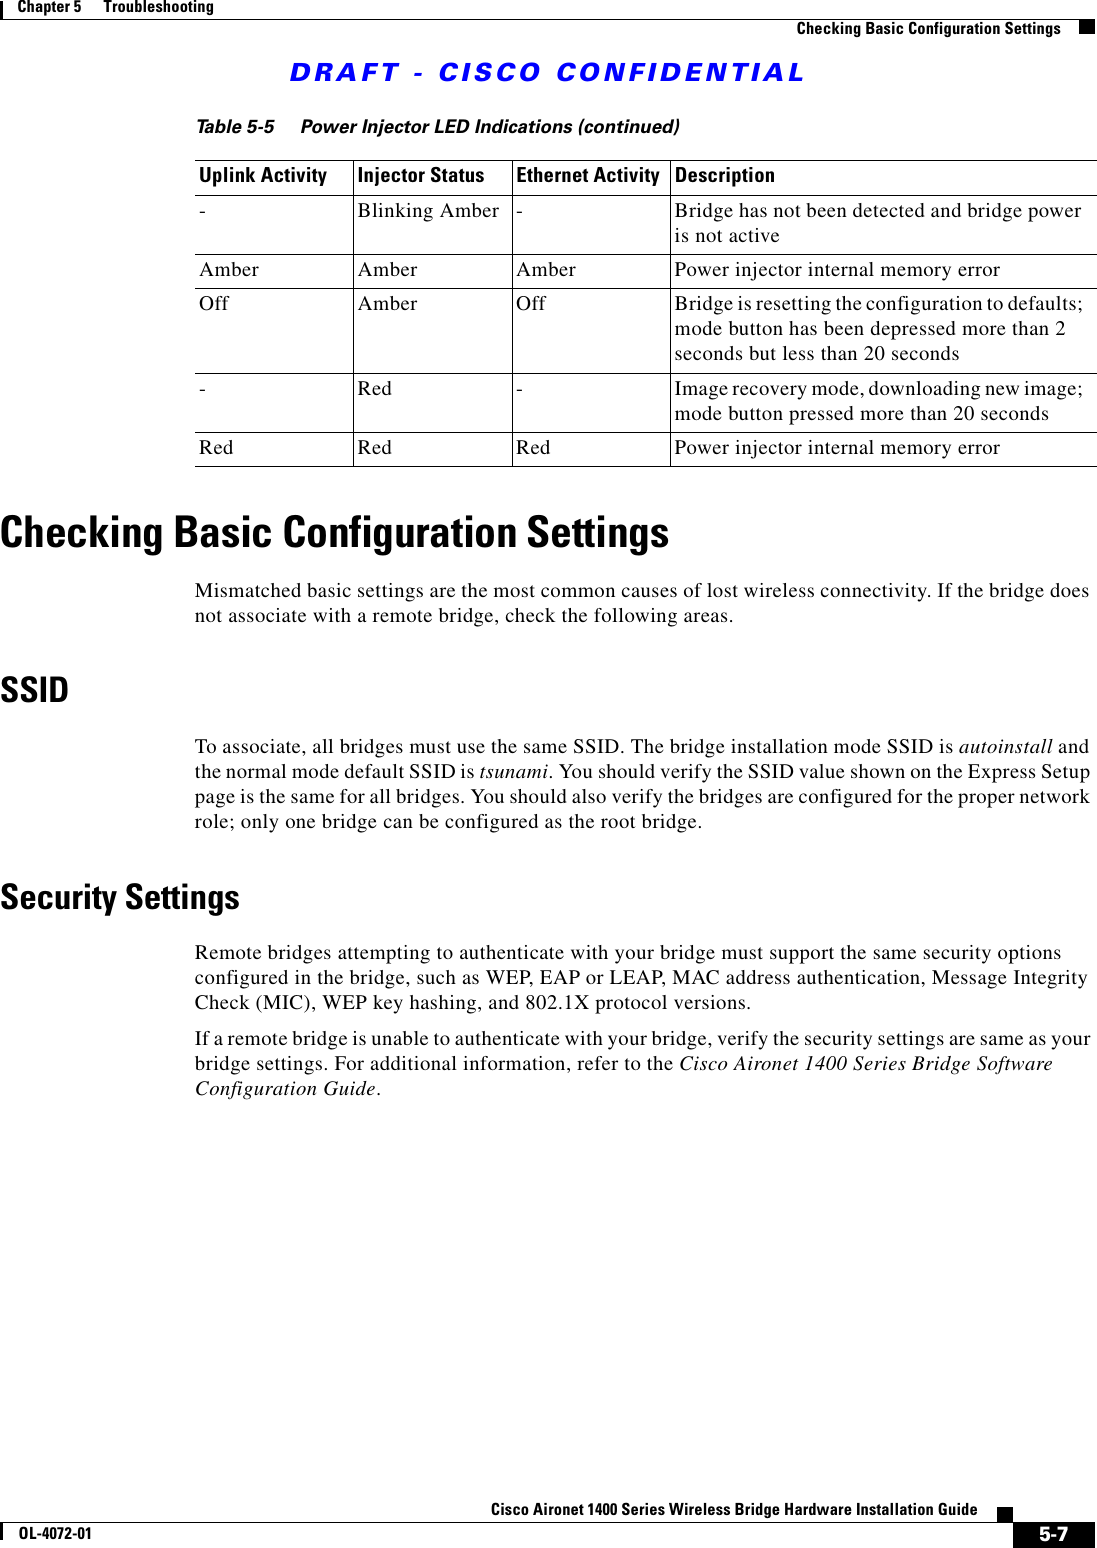 DRAFT - CISCO CONFIDENTIAL5-7Cisco Aironet 1400 Series Wireless Bridge Hardware Installation GuideOL-4072-01Chapter 5      TroubleshootingChecking Basic Configuration SettingsChecking Basic Configuration SettingsMismatched basic settings are the most common causes of lost wireless connectivity. If the bridge does not associate with a remote bridge, check the following areas.SSIDTo associate, all bridges must use the same SSID. The bridge installation mode SSID is autoinstall and the normal mode default SSID is tsunami. You should verify the SSID value shown on the Express Setup page is the same for all bridges. You should also verify the bridges are configured for the proper network role; only one bridge can be configured as the root bridge. Security SettingsRemote bridges attempting to authenticate with your bridge must support the same security options configured in the bridge, such as WEP, EAP or LEAP, MAC address authentication, Message Integrity Check (MIC), WEP key hashing, and 802.1X protocol versions.If a remote bridge is unable to authenticate with your bridge, verify the security settings are same as your bridge settings. For additional information, refer to the Cisco Aironet 1400 Series Bridge Software Configuration Guide.- Blinking Amber - Bridge has not been detected and bridge power is not activeAmber Amber Amber Power injector internal memory errorOff Amber Off Bridge is resetting the configuration to defaults; mode button has been depressed more than 2 seconds but less than 20 seconds- Red - Image recovery mode, downloading new image; mode button pressed more than 20 secondsRed Red Red Power injector internal memory errorTable 5-5 Power Injector LED Indications (continued)Uplink Activity Injector Status Ethernet Activity Description